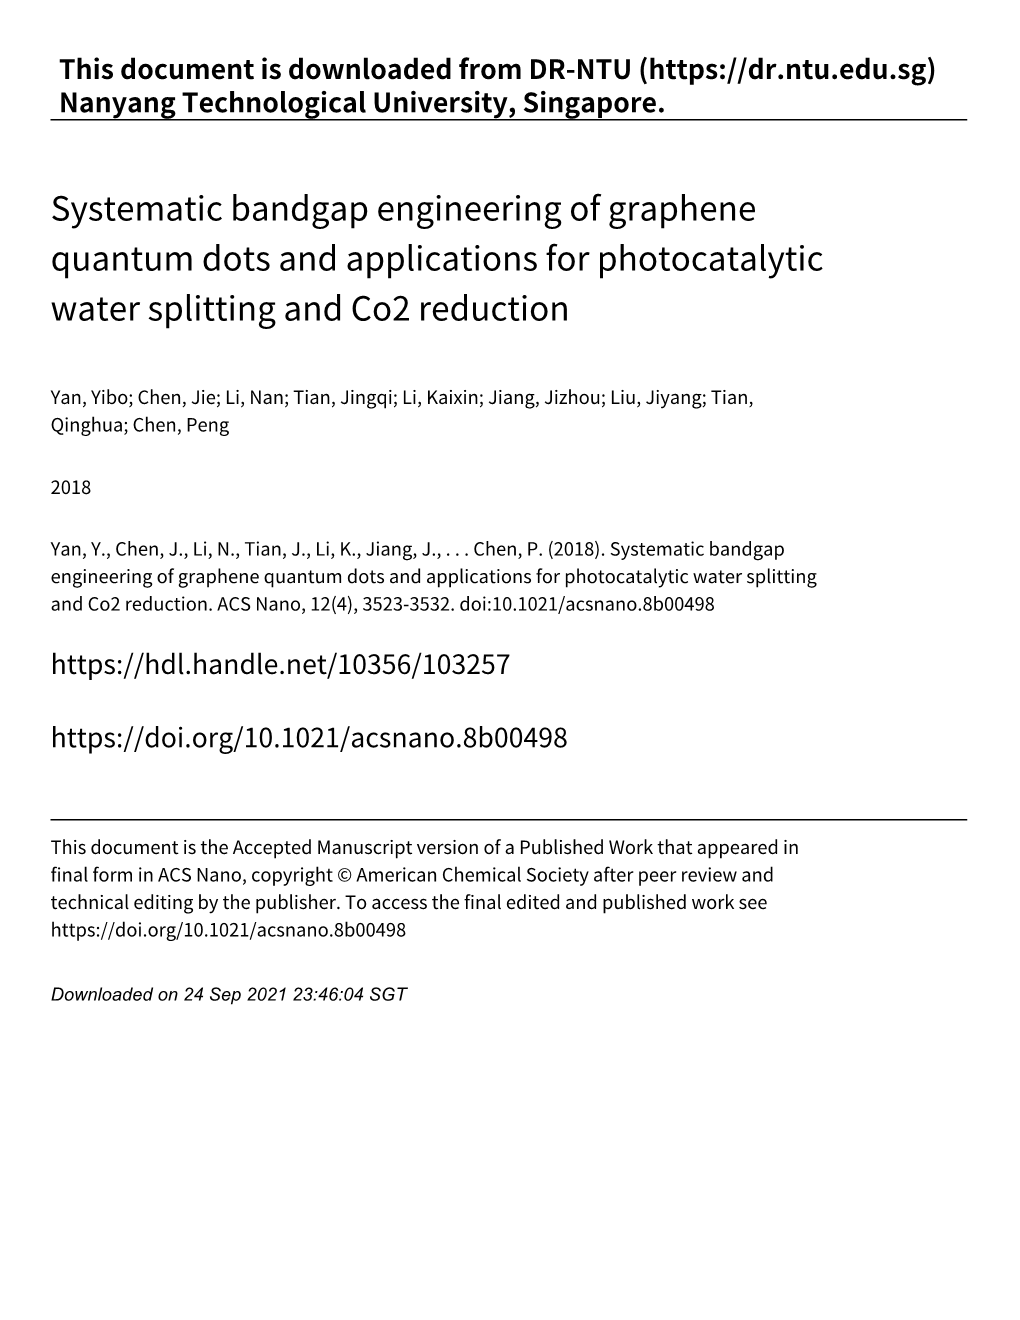 Systematic Bandgap Engineering of Graphene Quantum Dots and Applications for Photocatalytic Water Splitting and Co2 Reduction